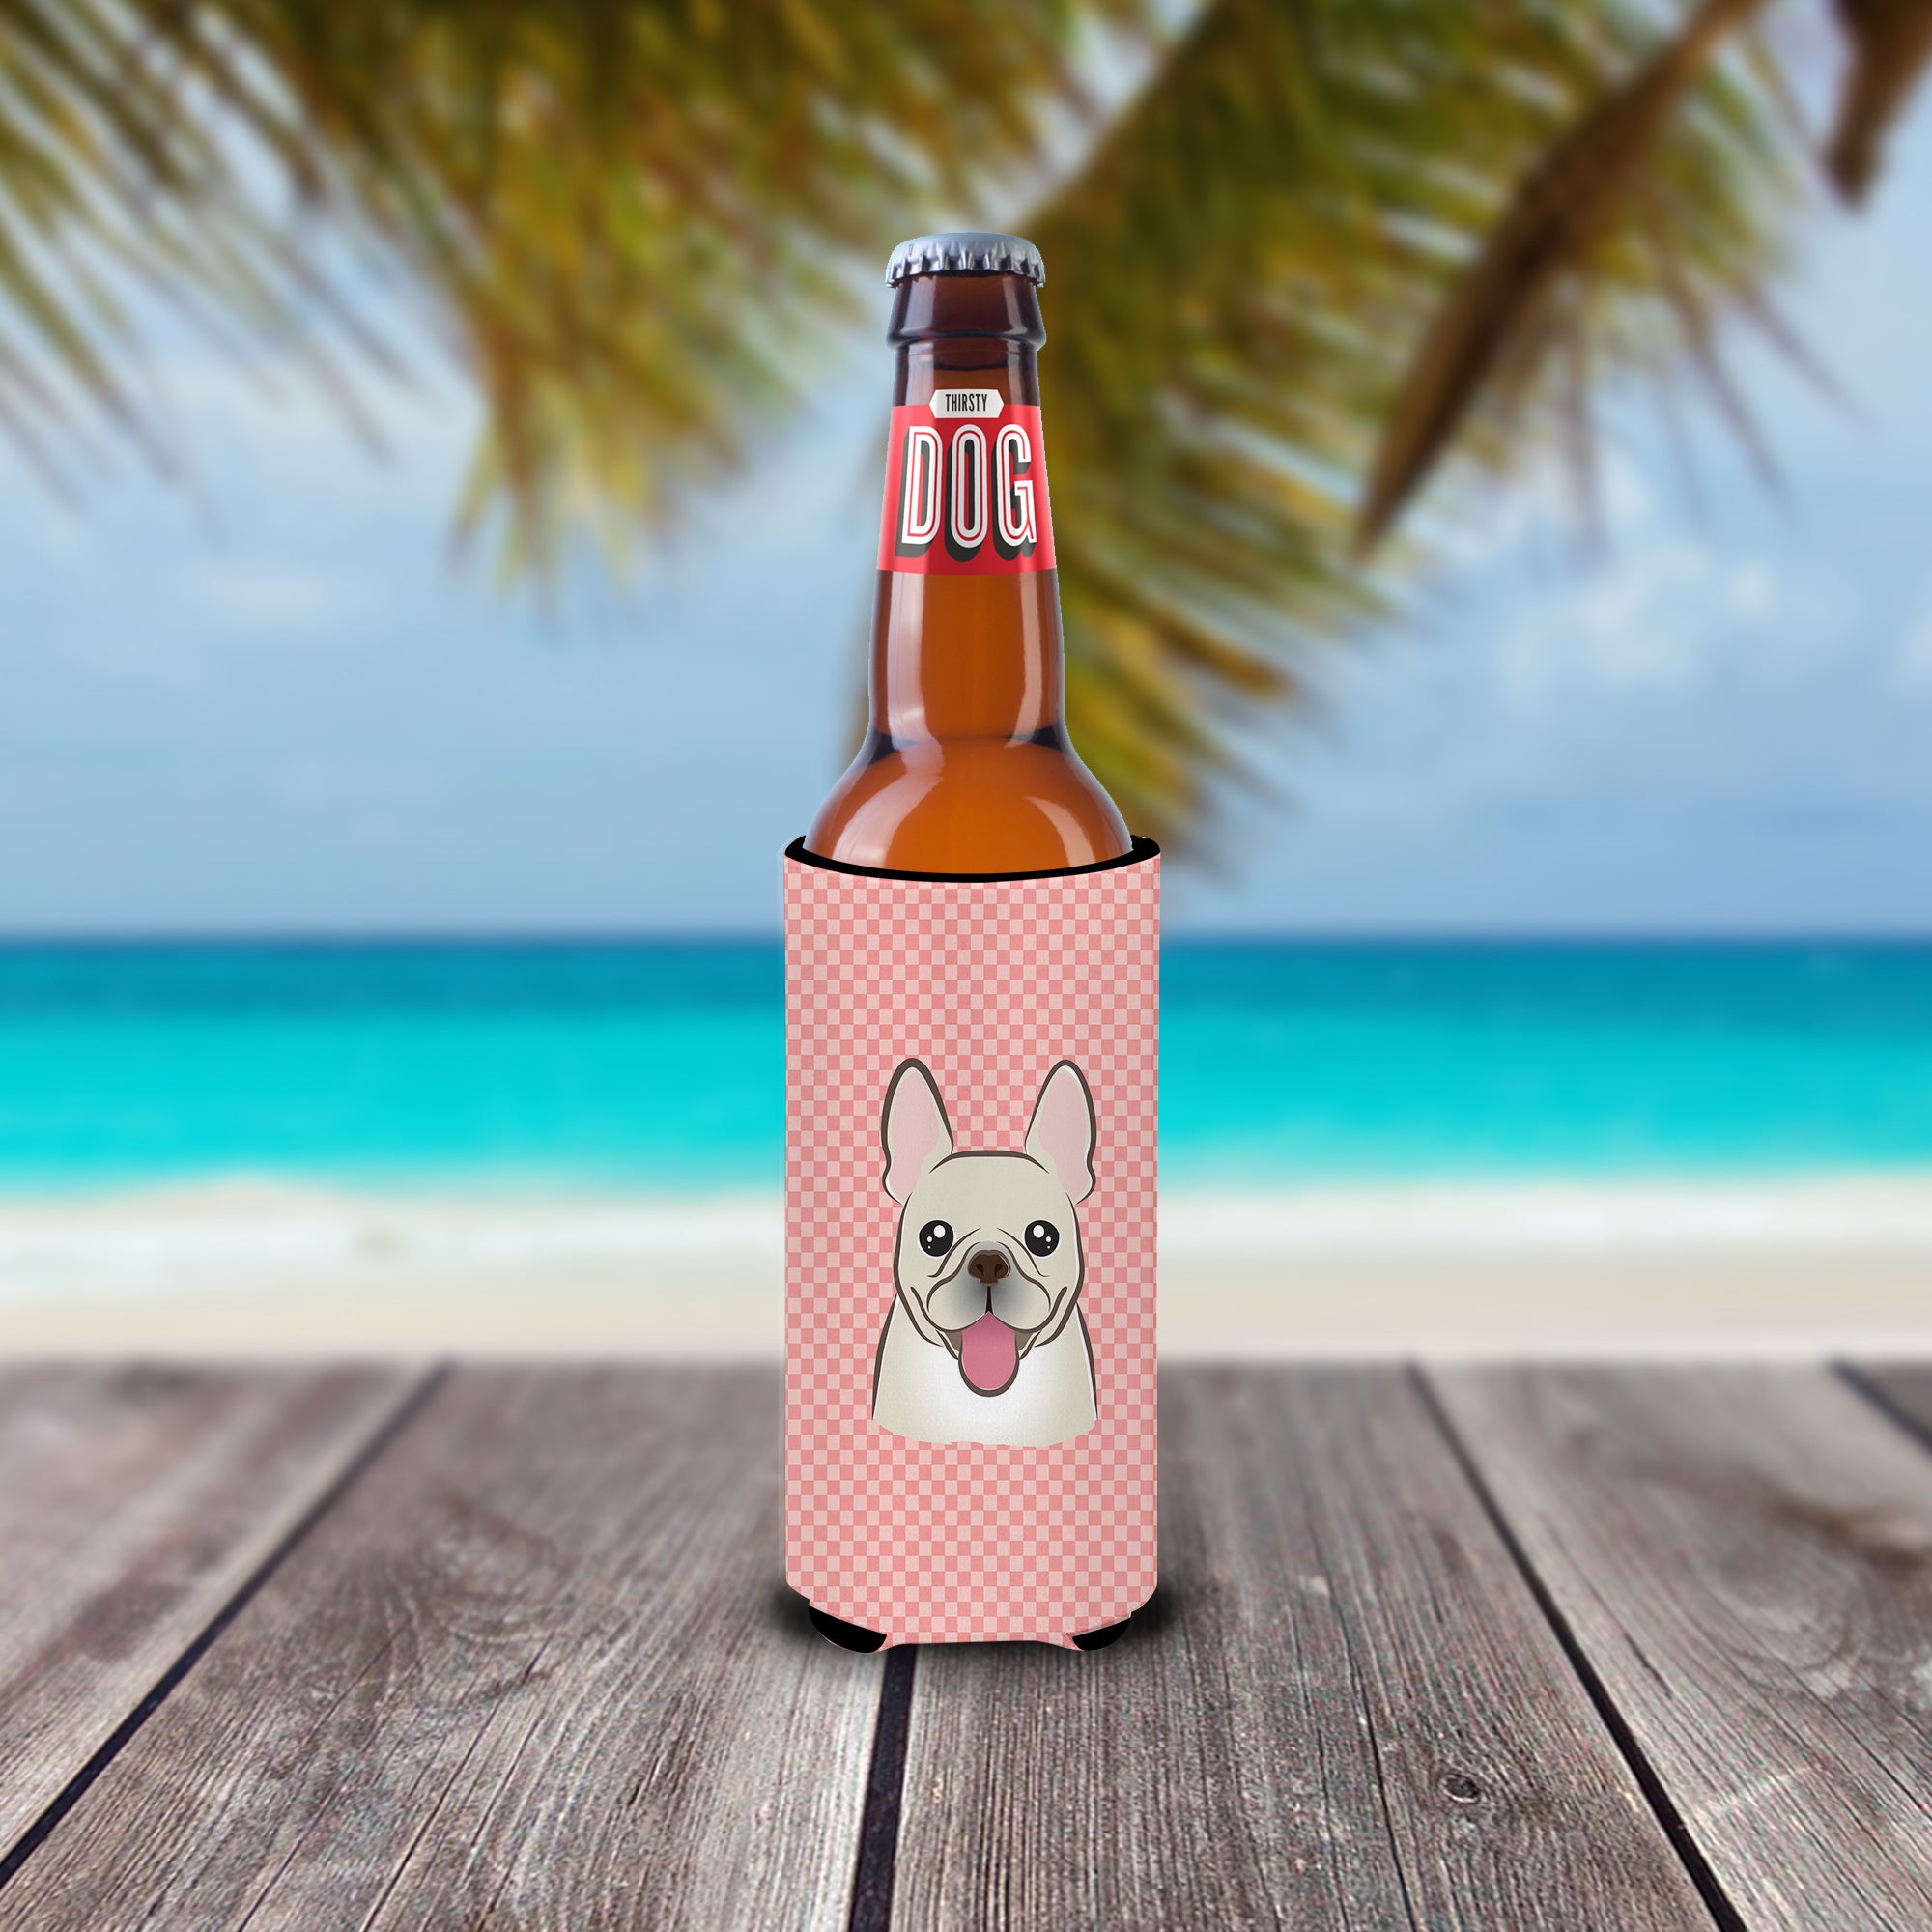 Checkerboard Pink French Bulldog Ultra Beverage Insulators for slim cans BB1238MUK.